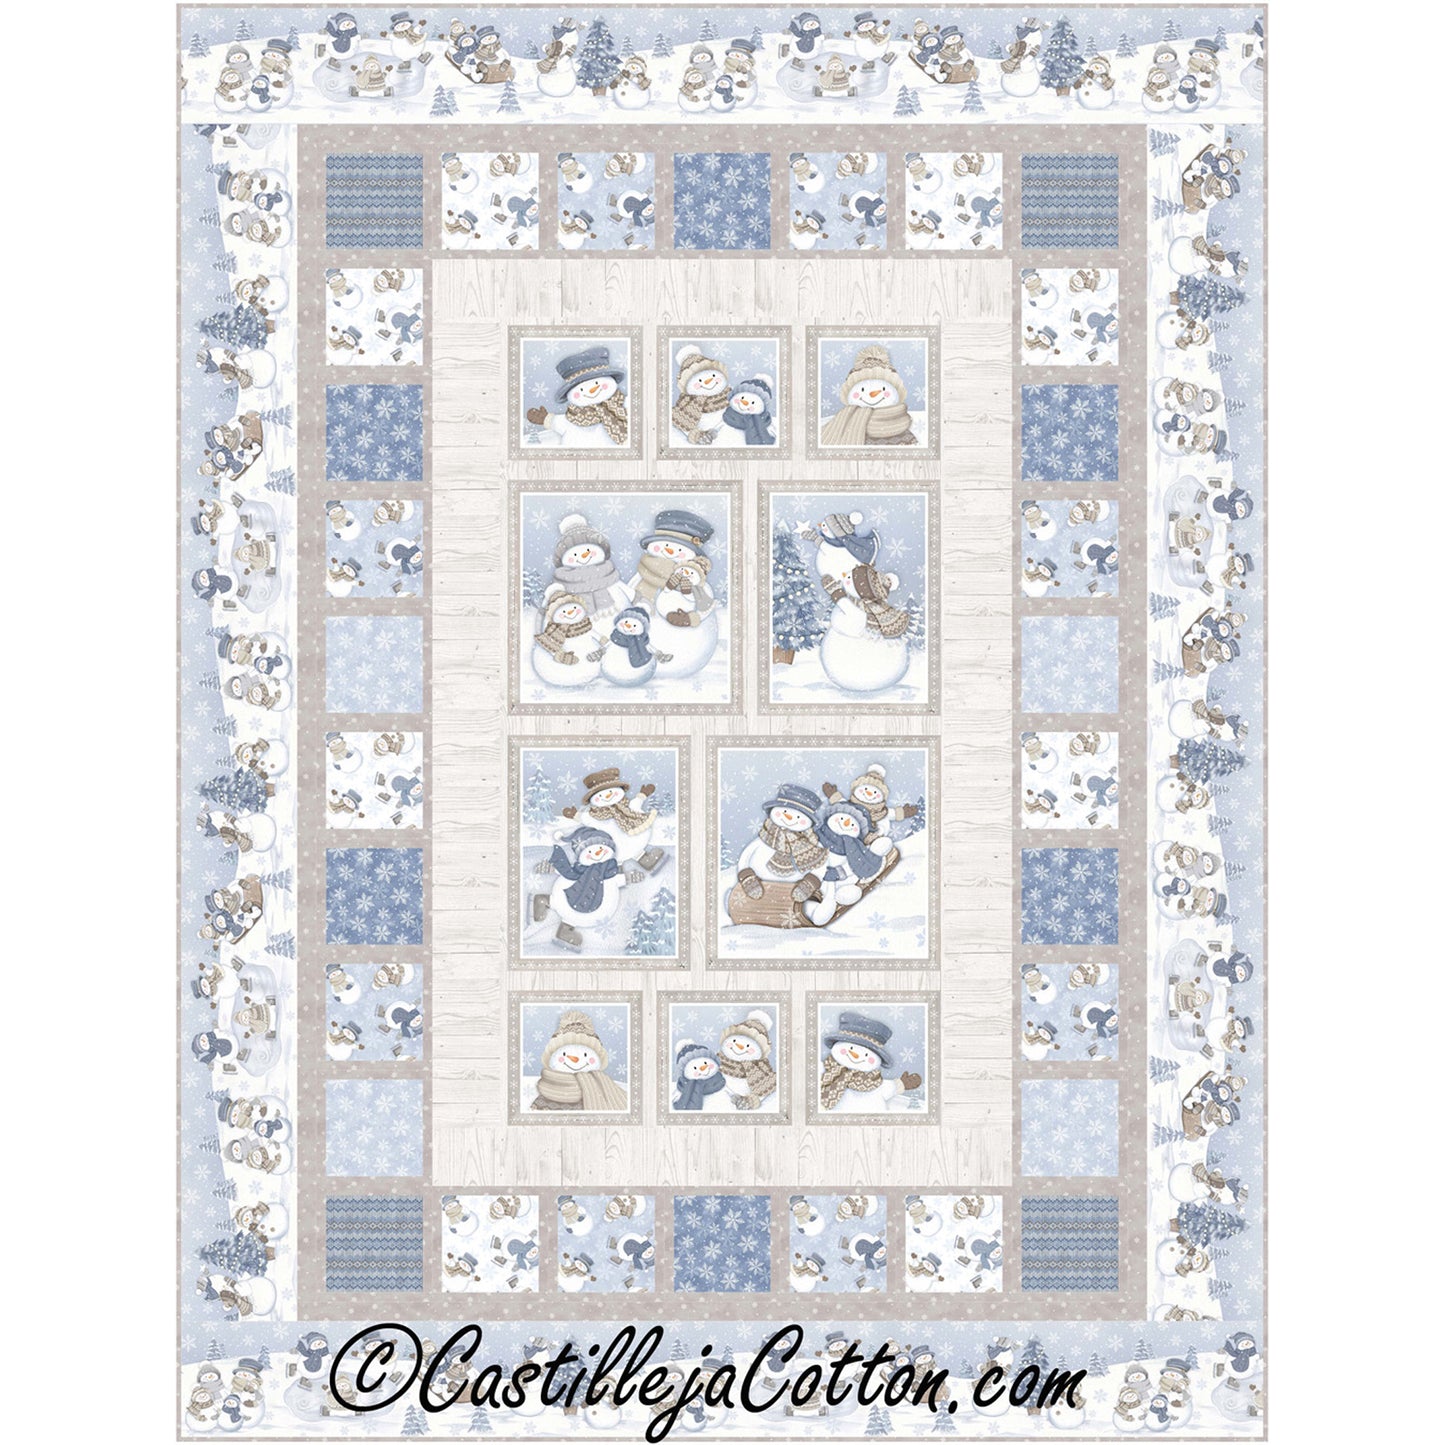 Winter fun quilt adorned with charming snowmen family enjoying outdoor activities